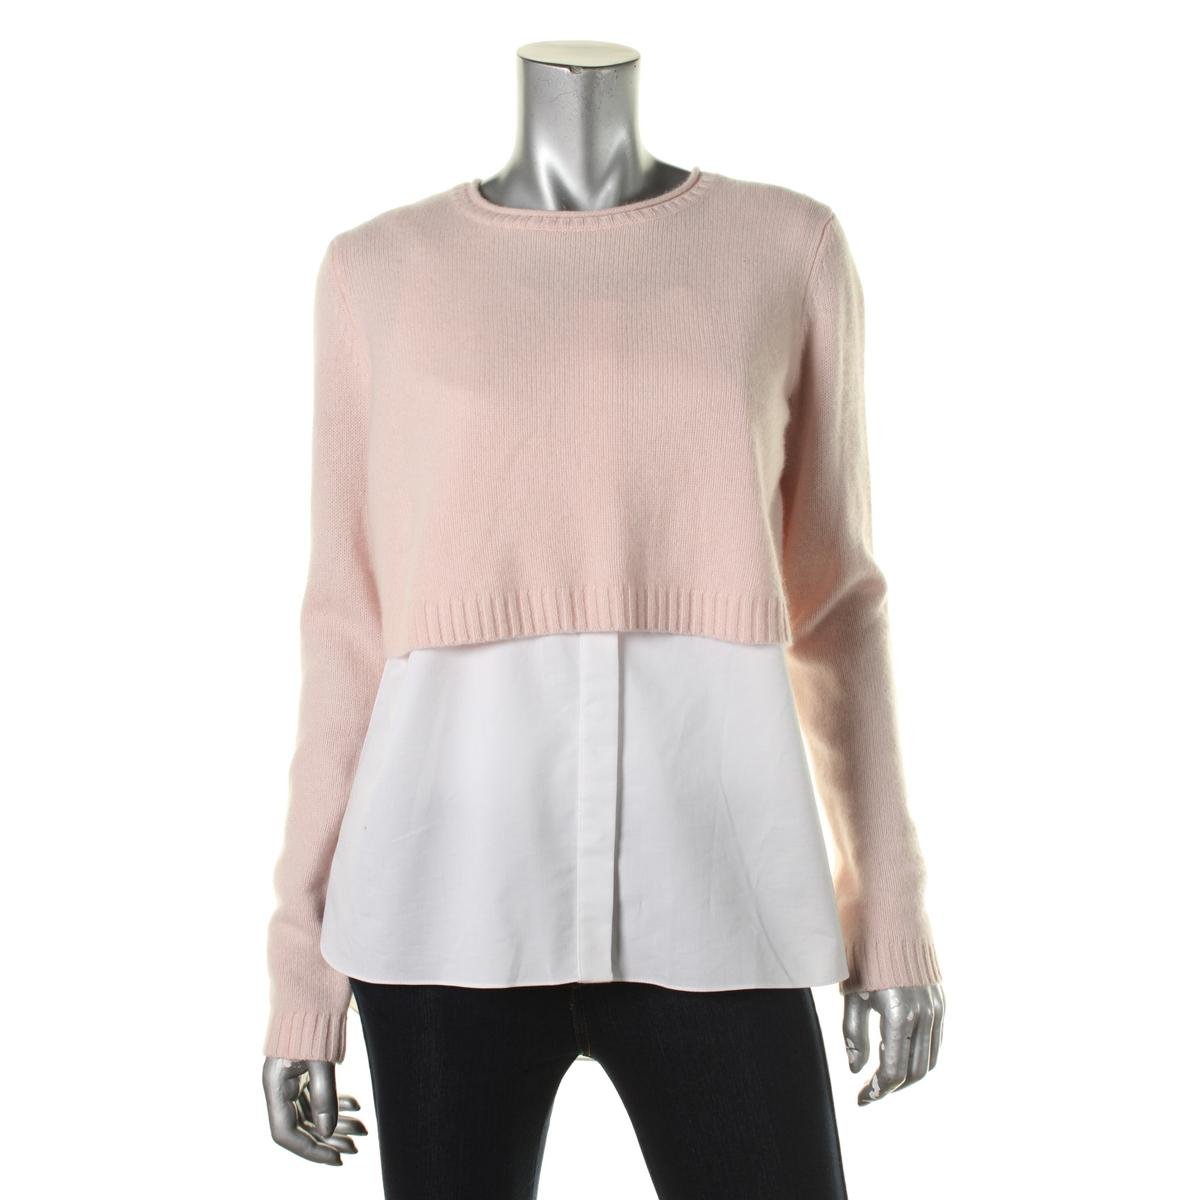 Elie Tahari 0024 Womens Lacy Pink Cashmere 2PC Crop Sweater Top S BHFO